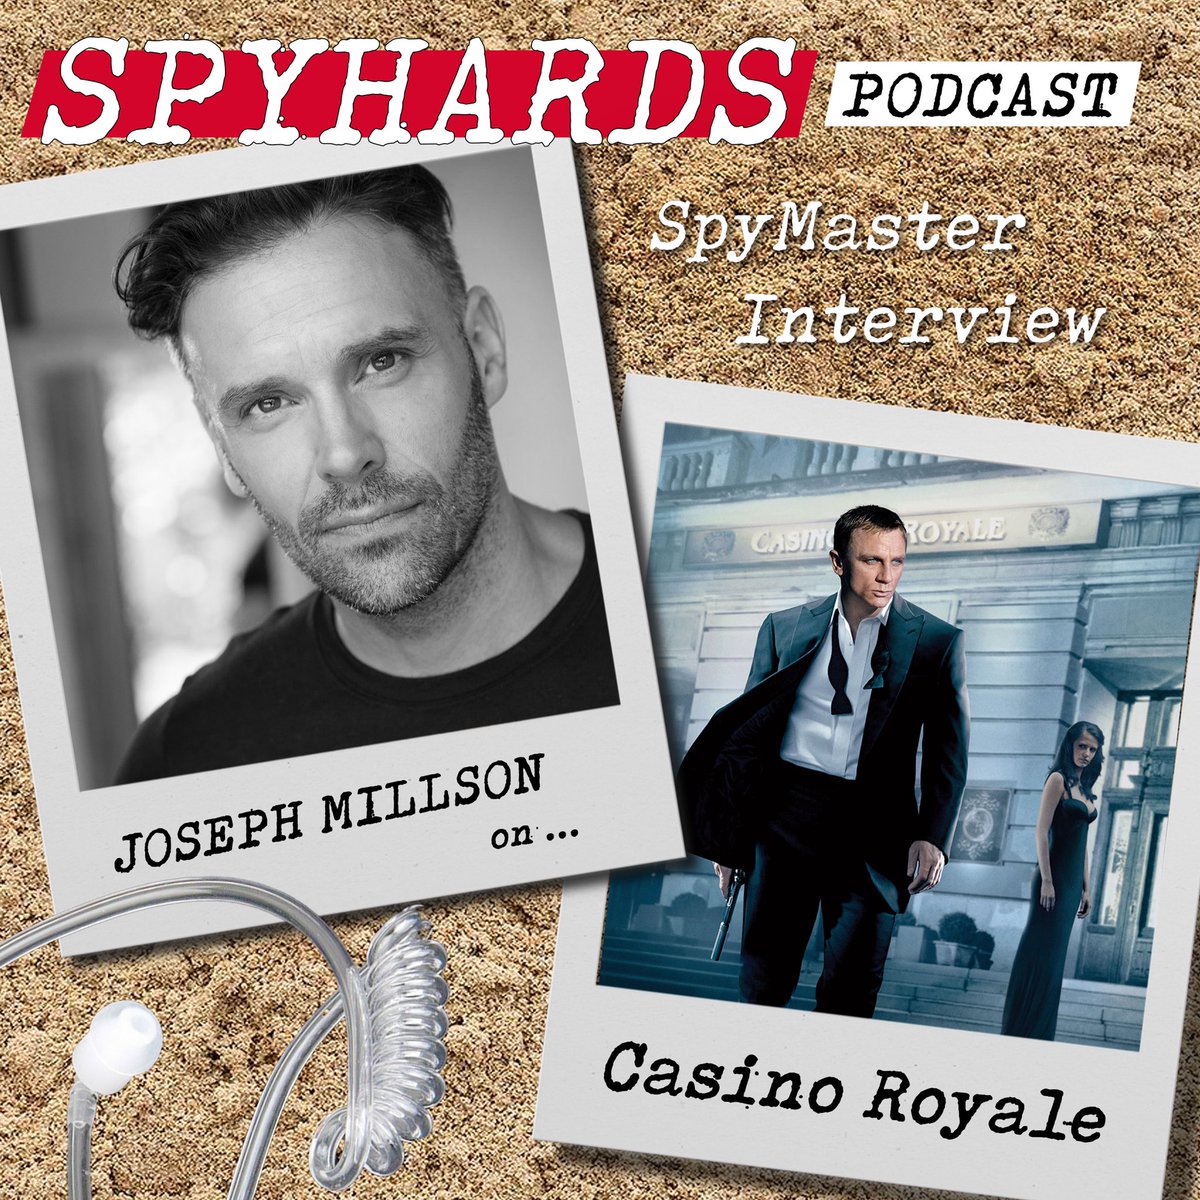 New SpyMaster Interview🎙 Agent Scott is joined by star of screen and stage, @josephmillson to break down his role as ‘Carter’ in 2006s smash-hit #JamesBond film CASINO ROYALE! Listen now: pod.fo/e/1453dc